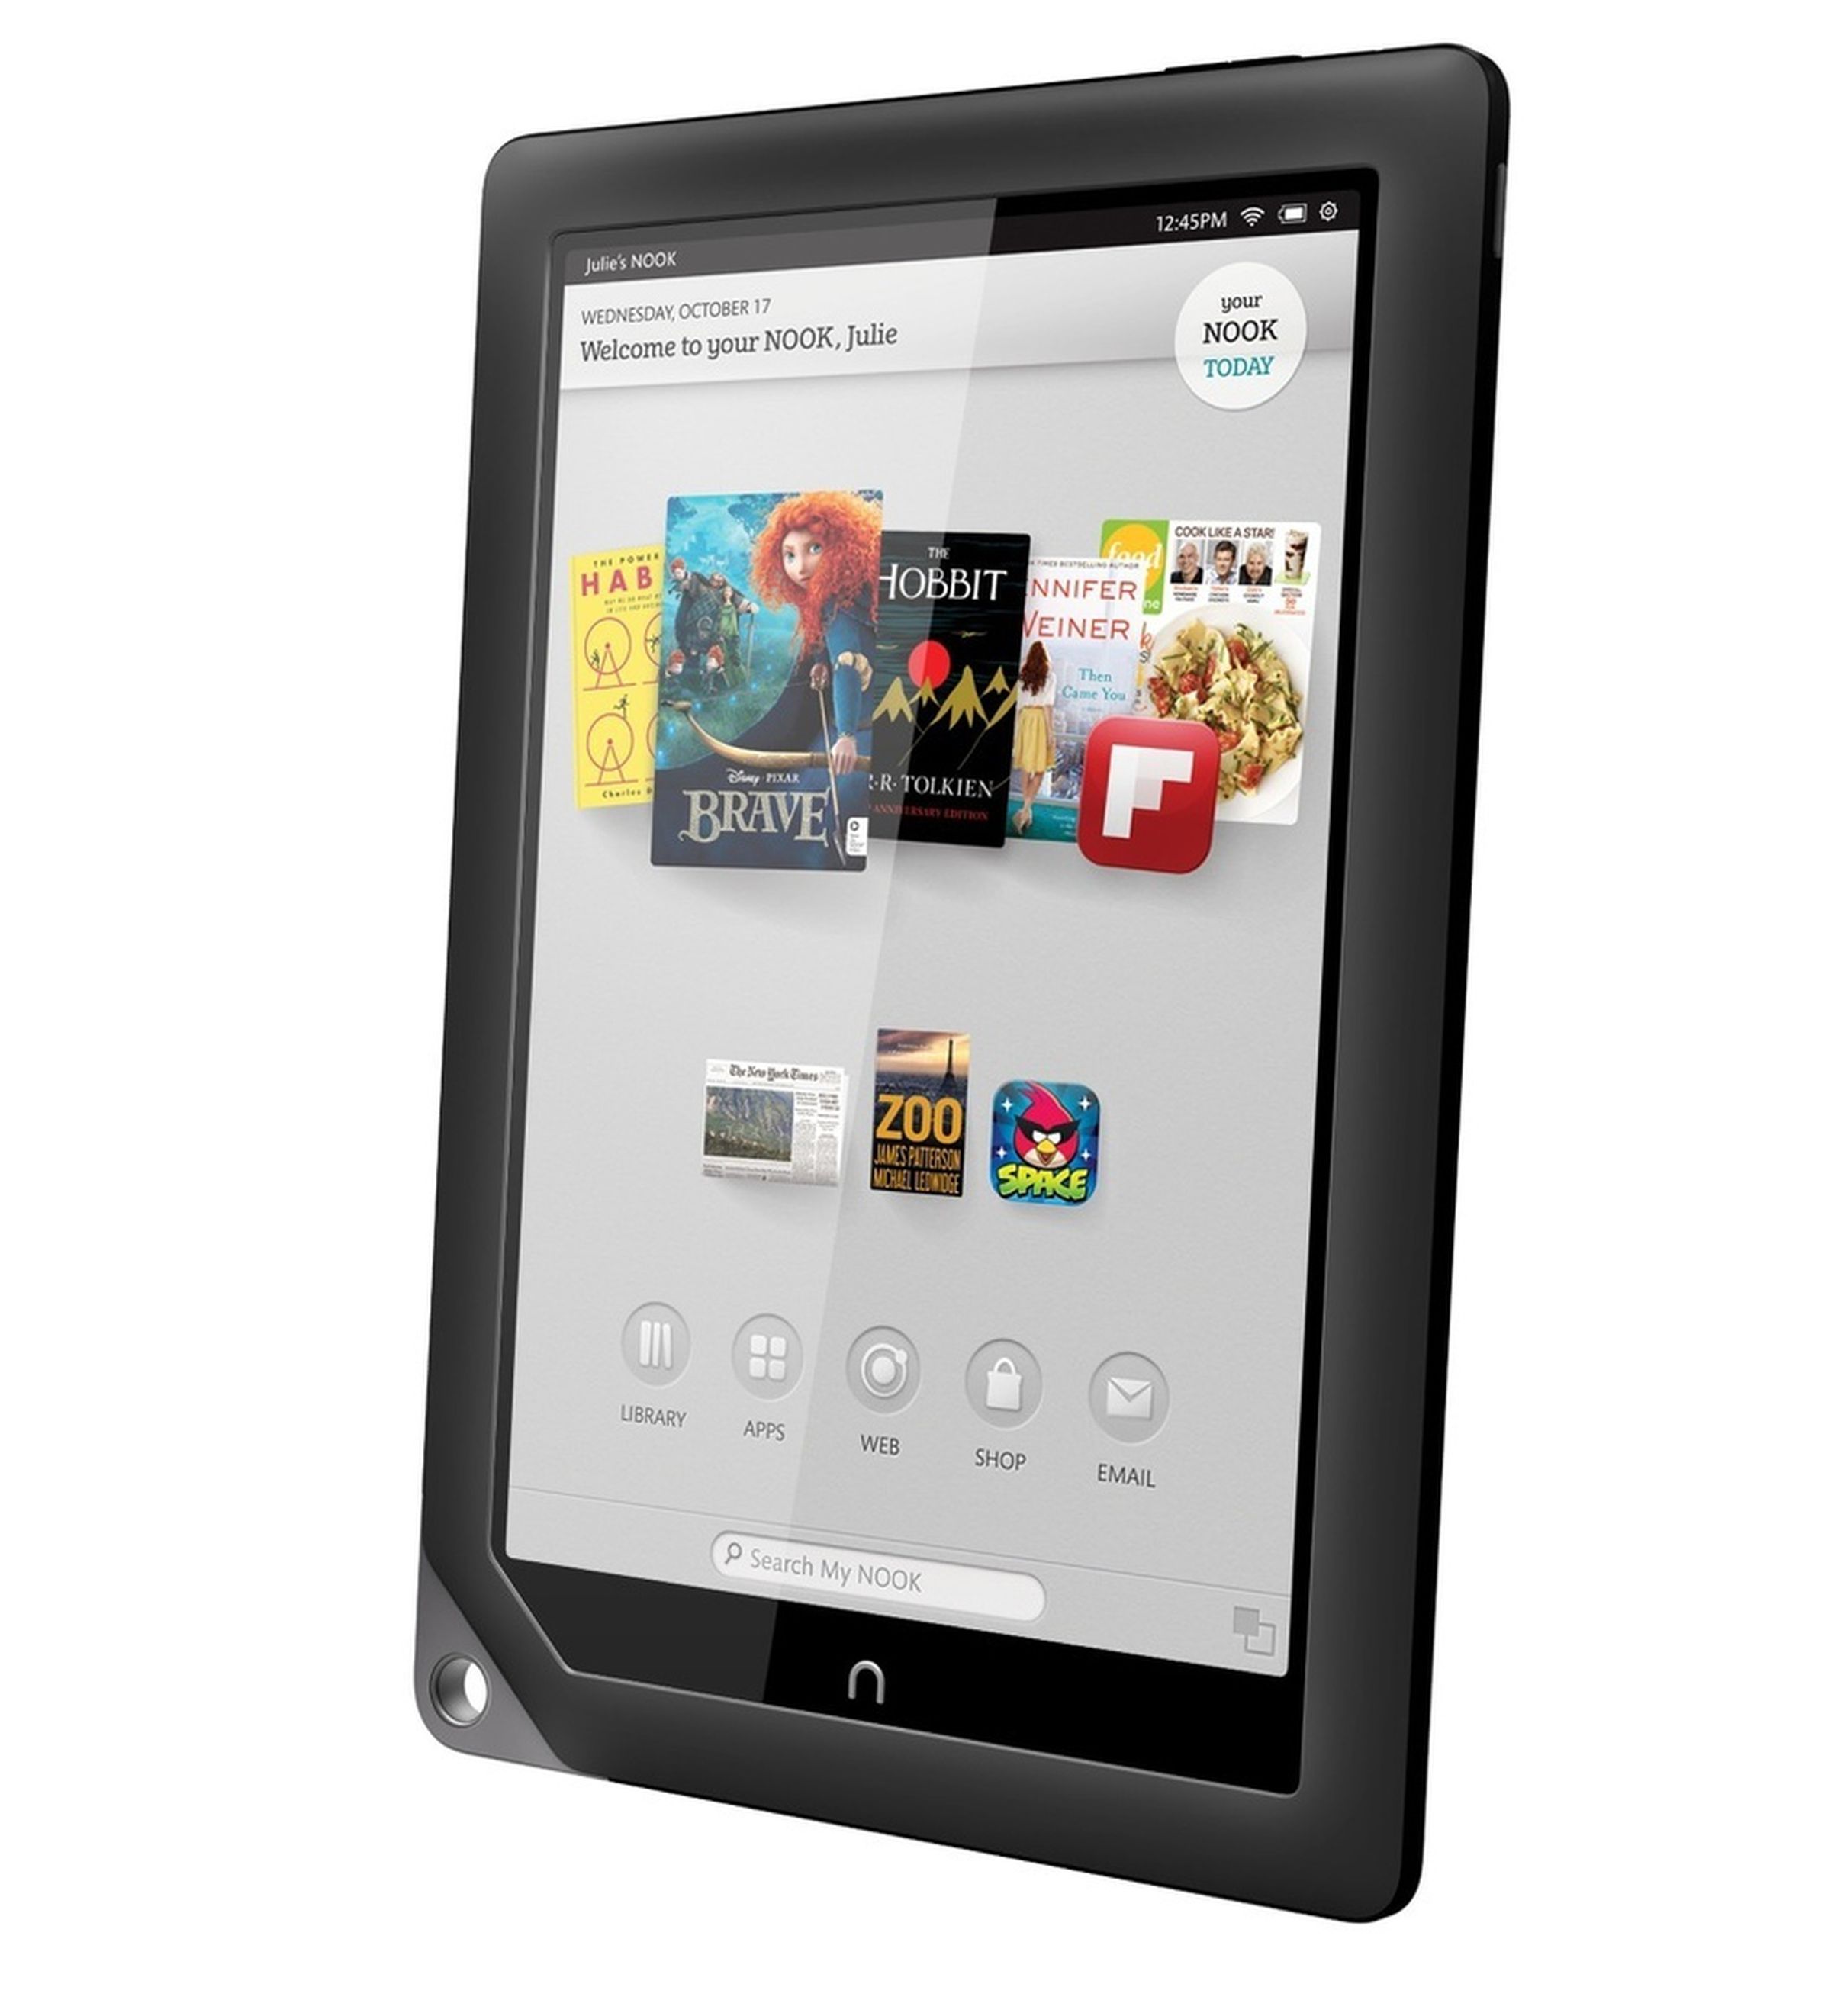 Barnes & Noble Nook HD and Nook HD+ pictures